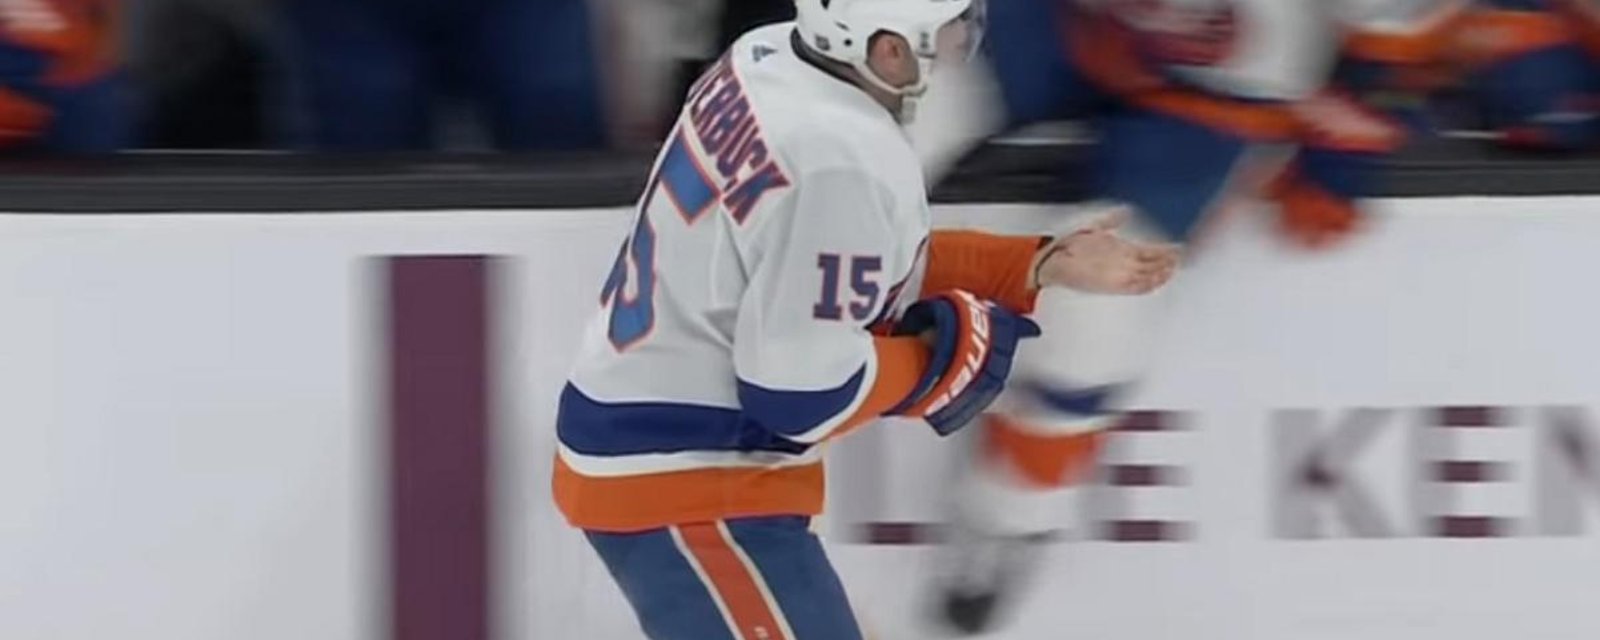 Islanders confirm Cal Clutterbuck seriously injured after being cut by a skate.